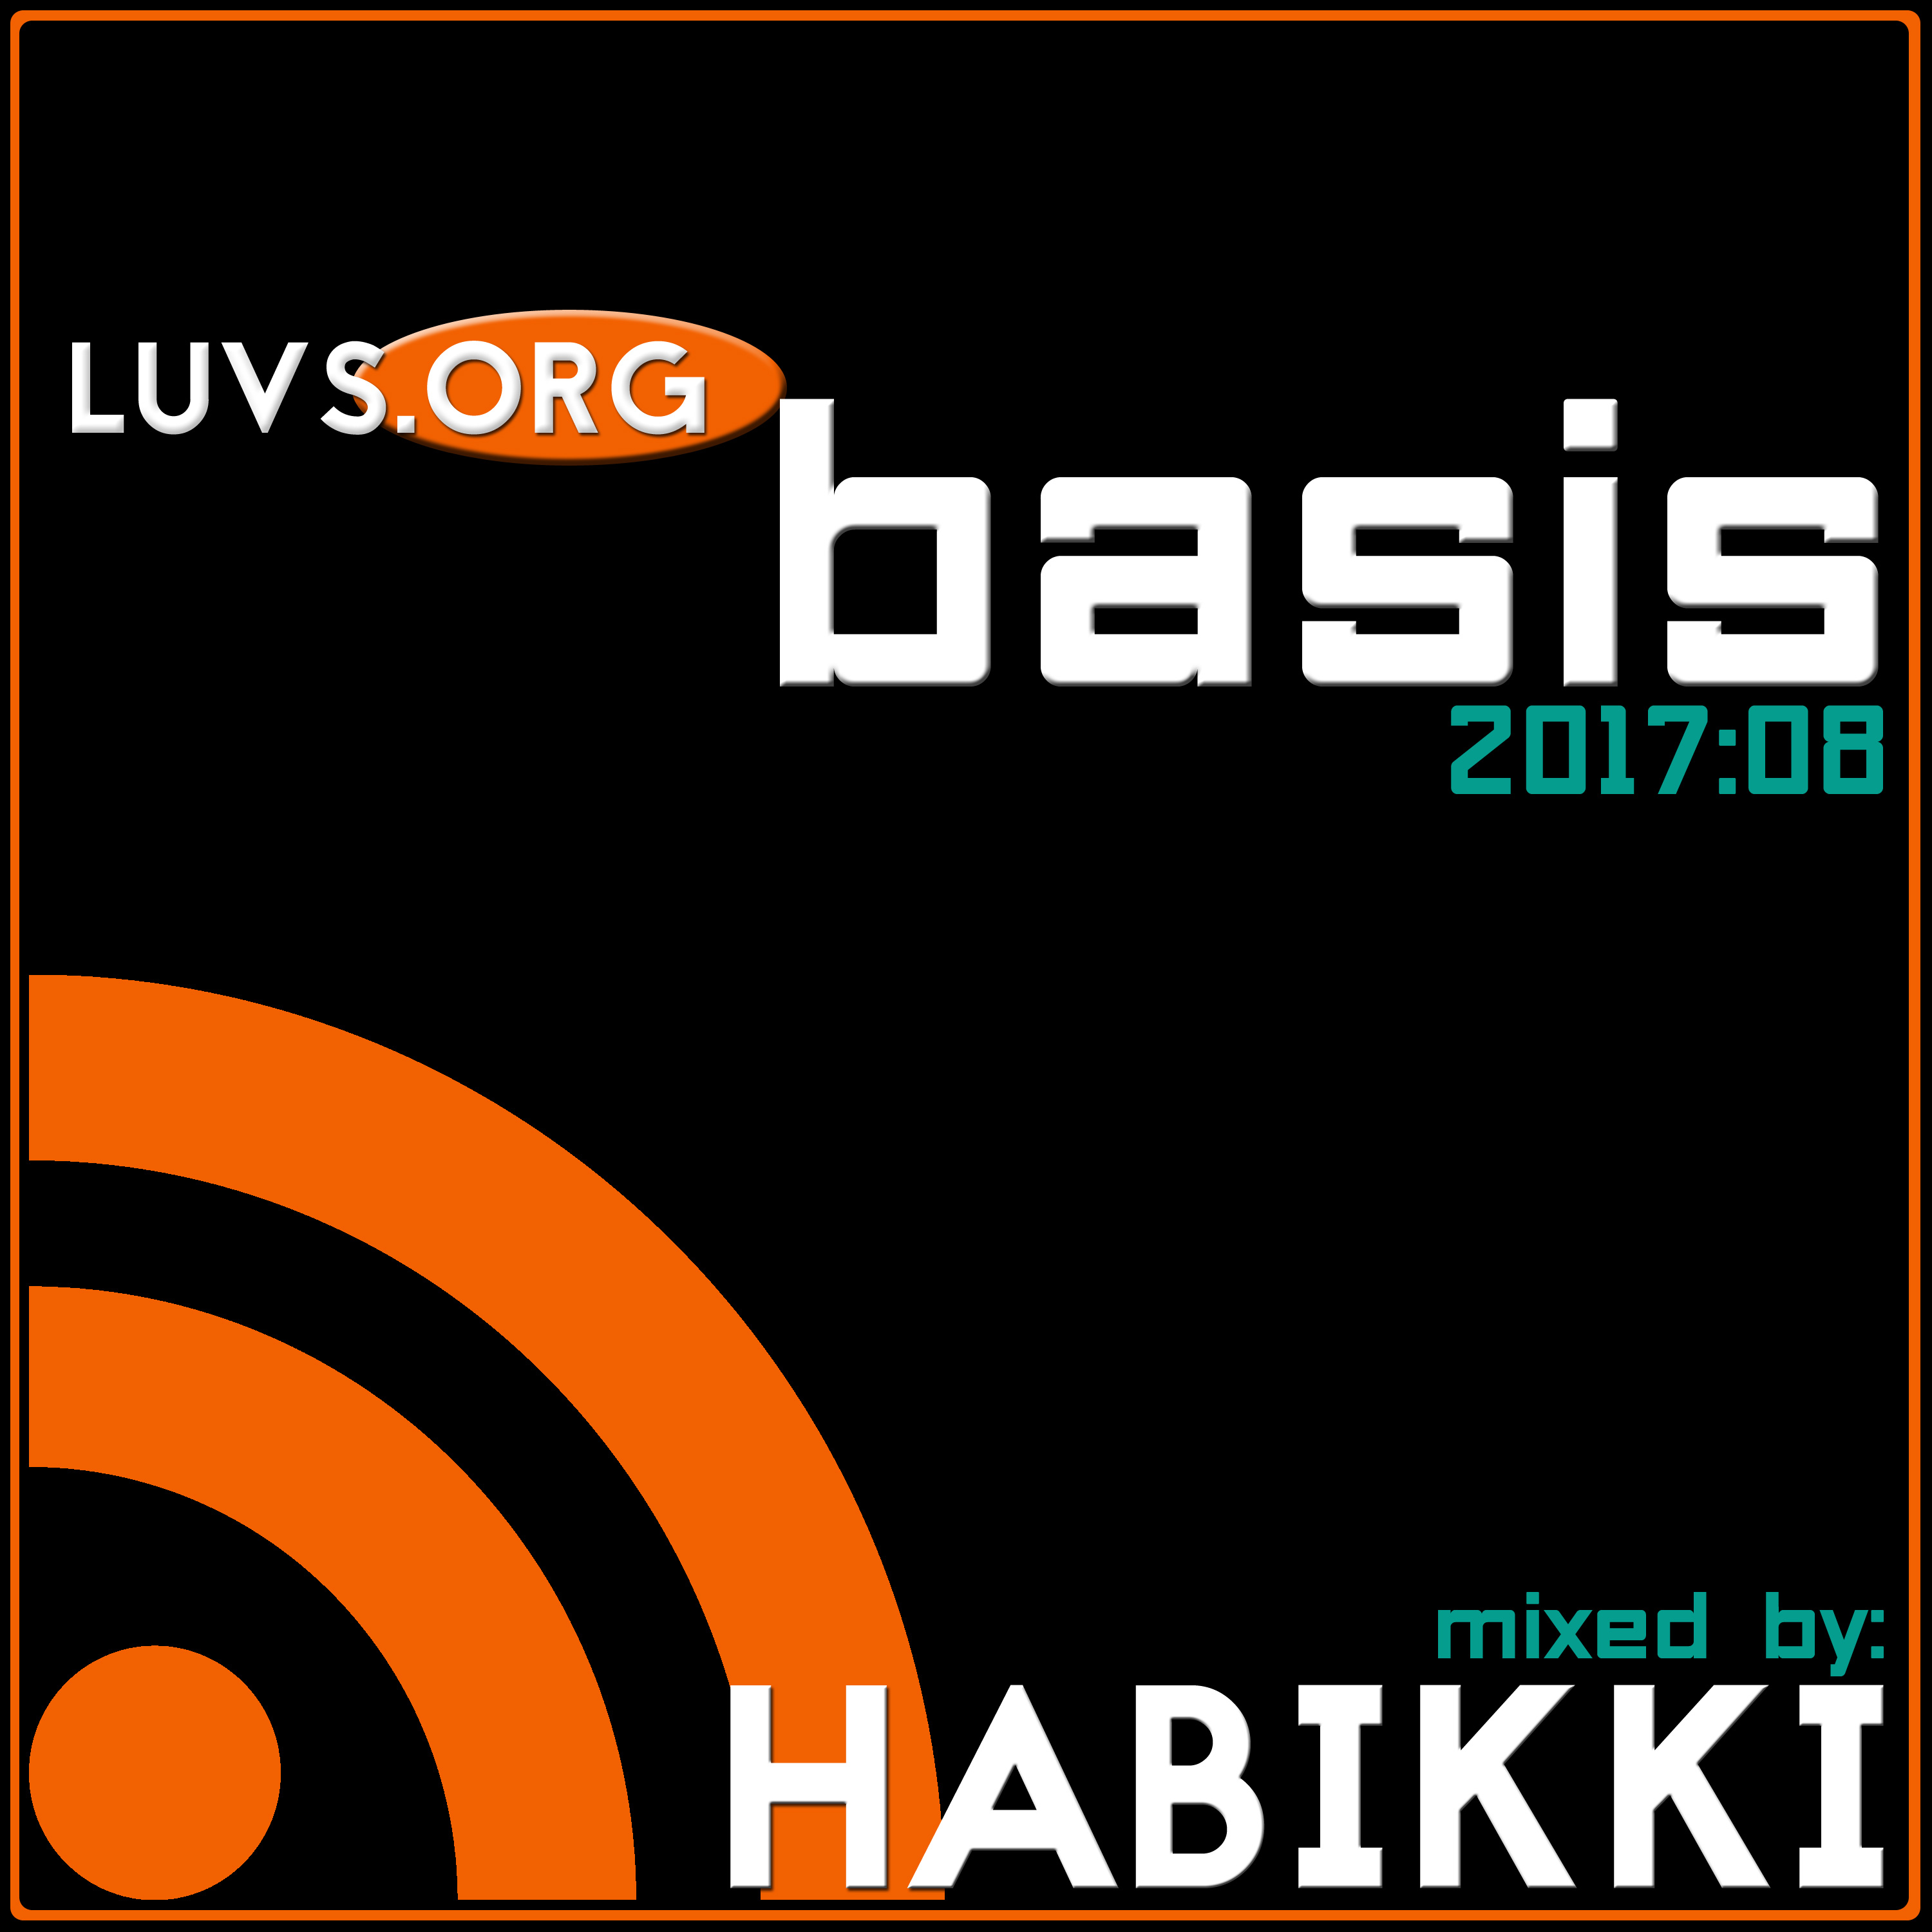 Luvs.org Sessions: [2017:08] Basis